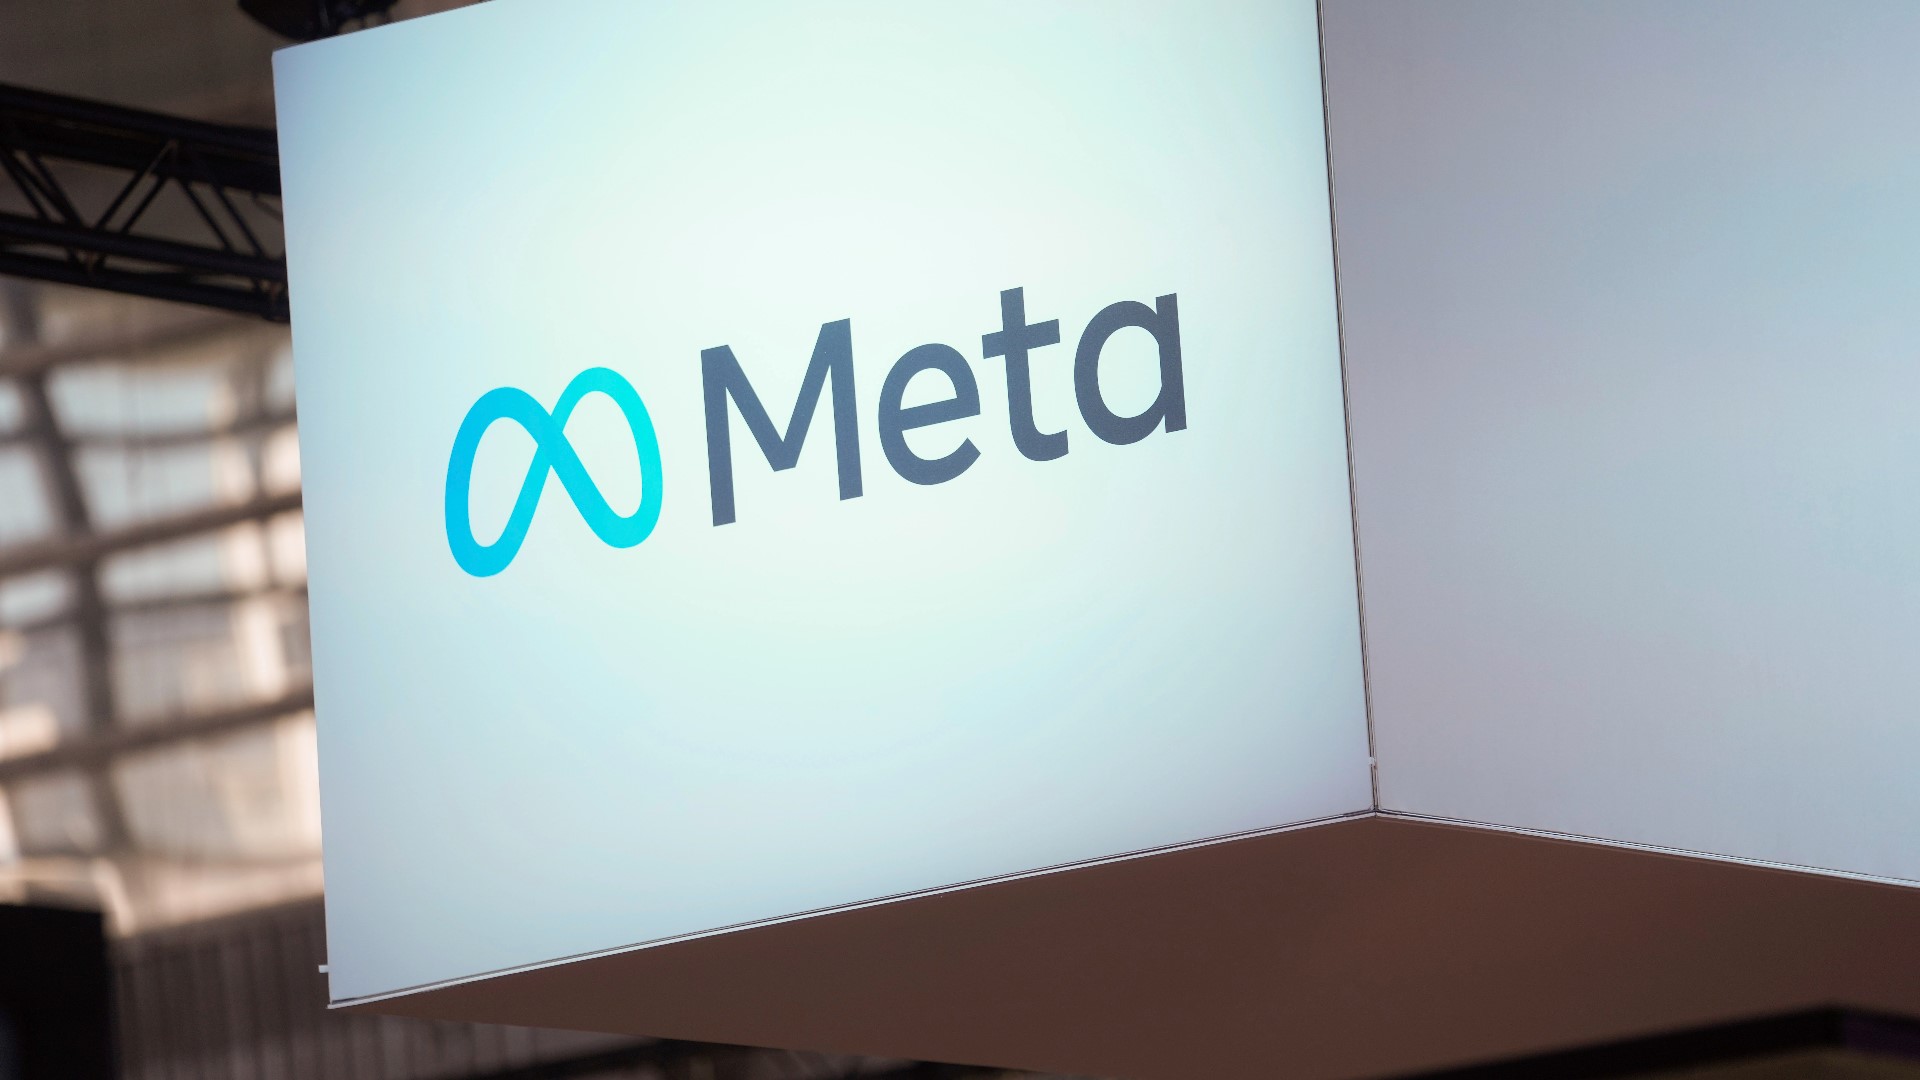 A lawsuit filed by 33 states in federal court in California, claims that Meta routinely collects data on children under 13 without their parents' consent.